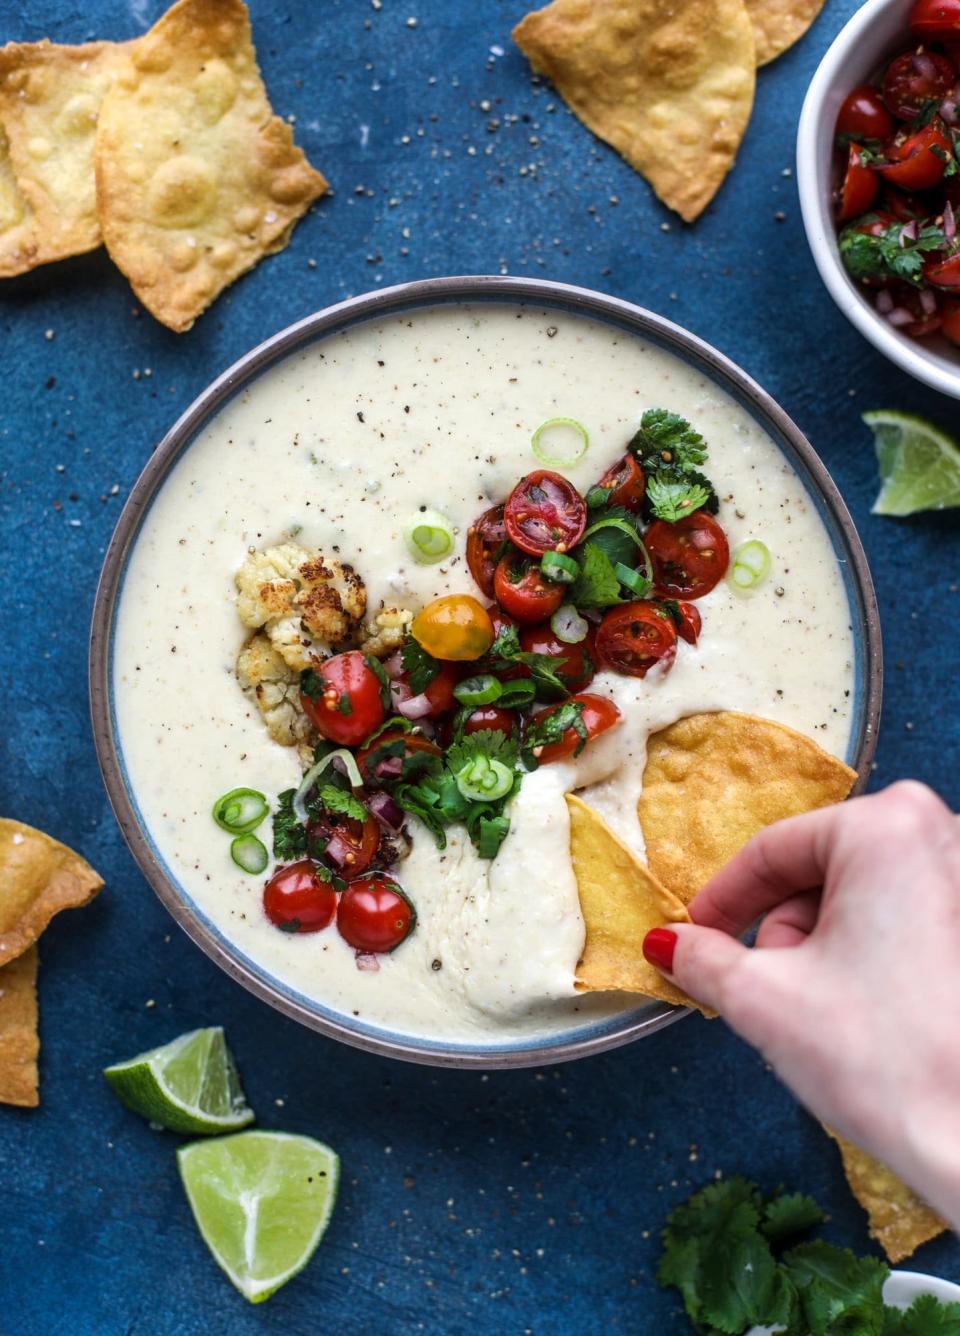 <strong>Get the <a href="https://www.howsweeteats.com/2019/02/cauliflower-queso/" target="_blank" rel="noopener noreferrer">Roasted Cauliflower Queso</a> recipe from How Sweet Eats</strong>